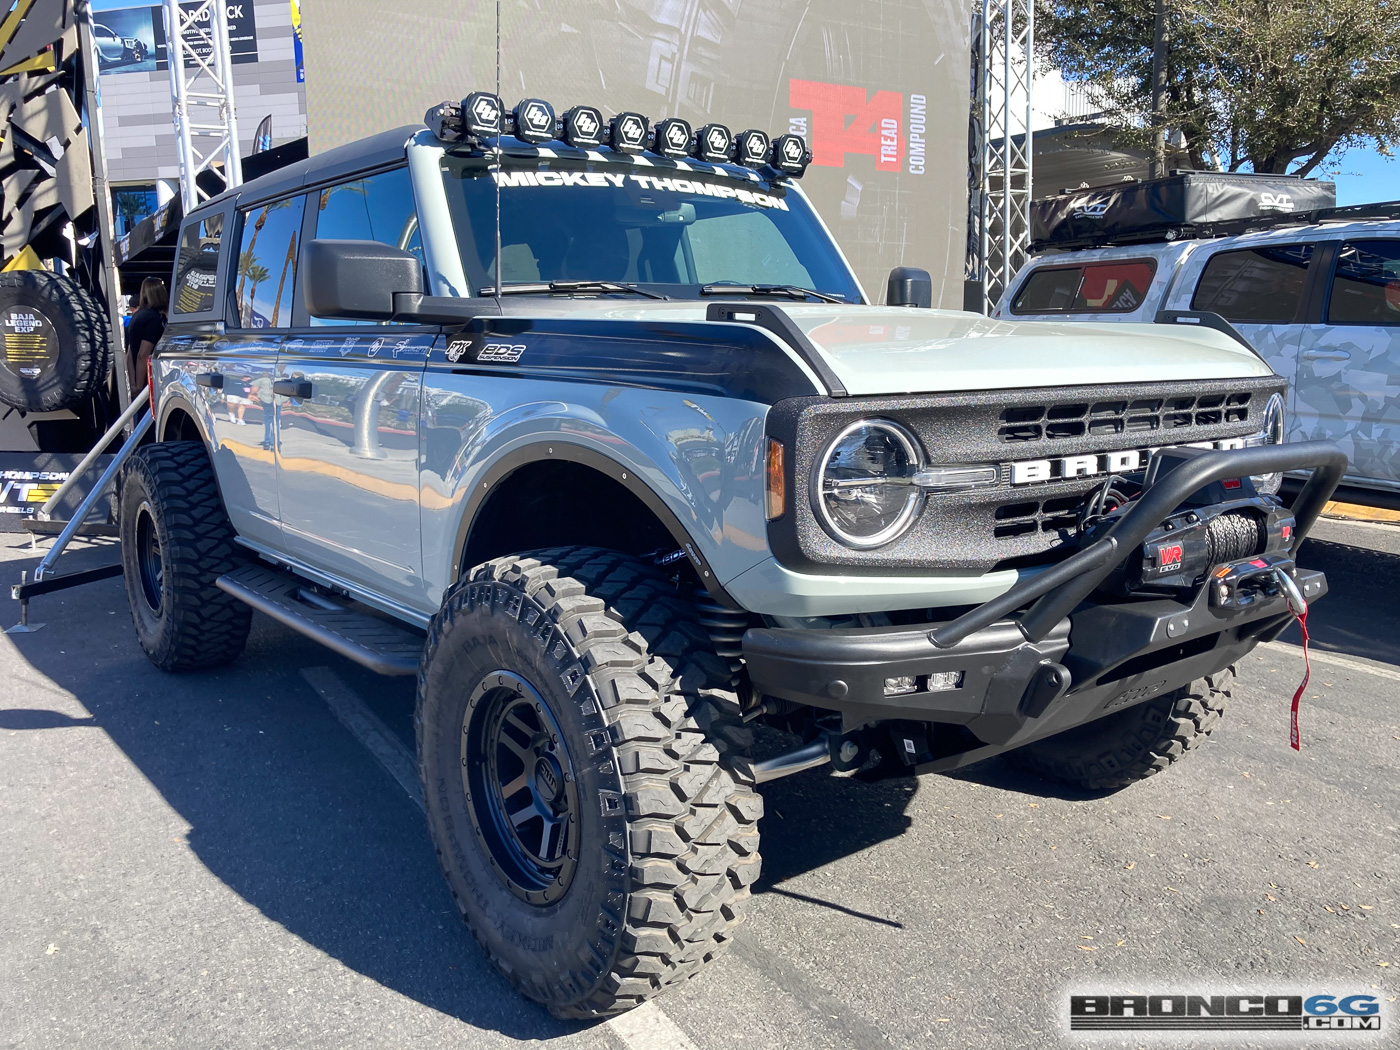 Ford Bronco Mickey Thompson Bronco Build at SEMA 2021 mickey-thompson-bronco-sema-2021-1